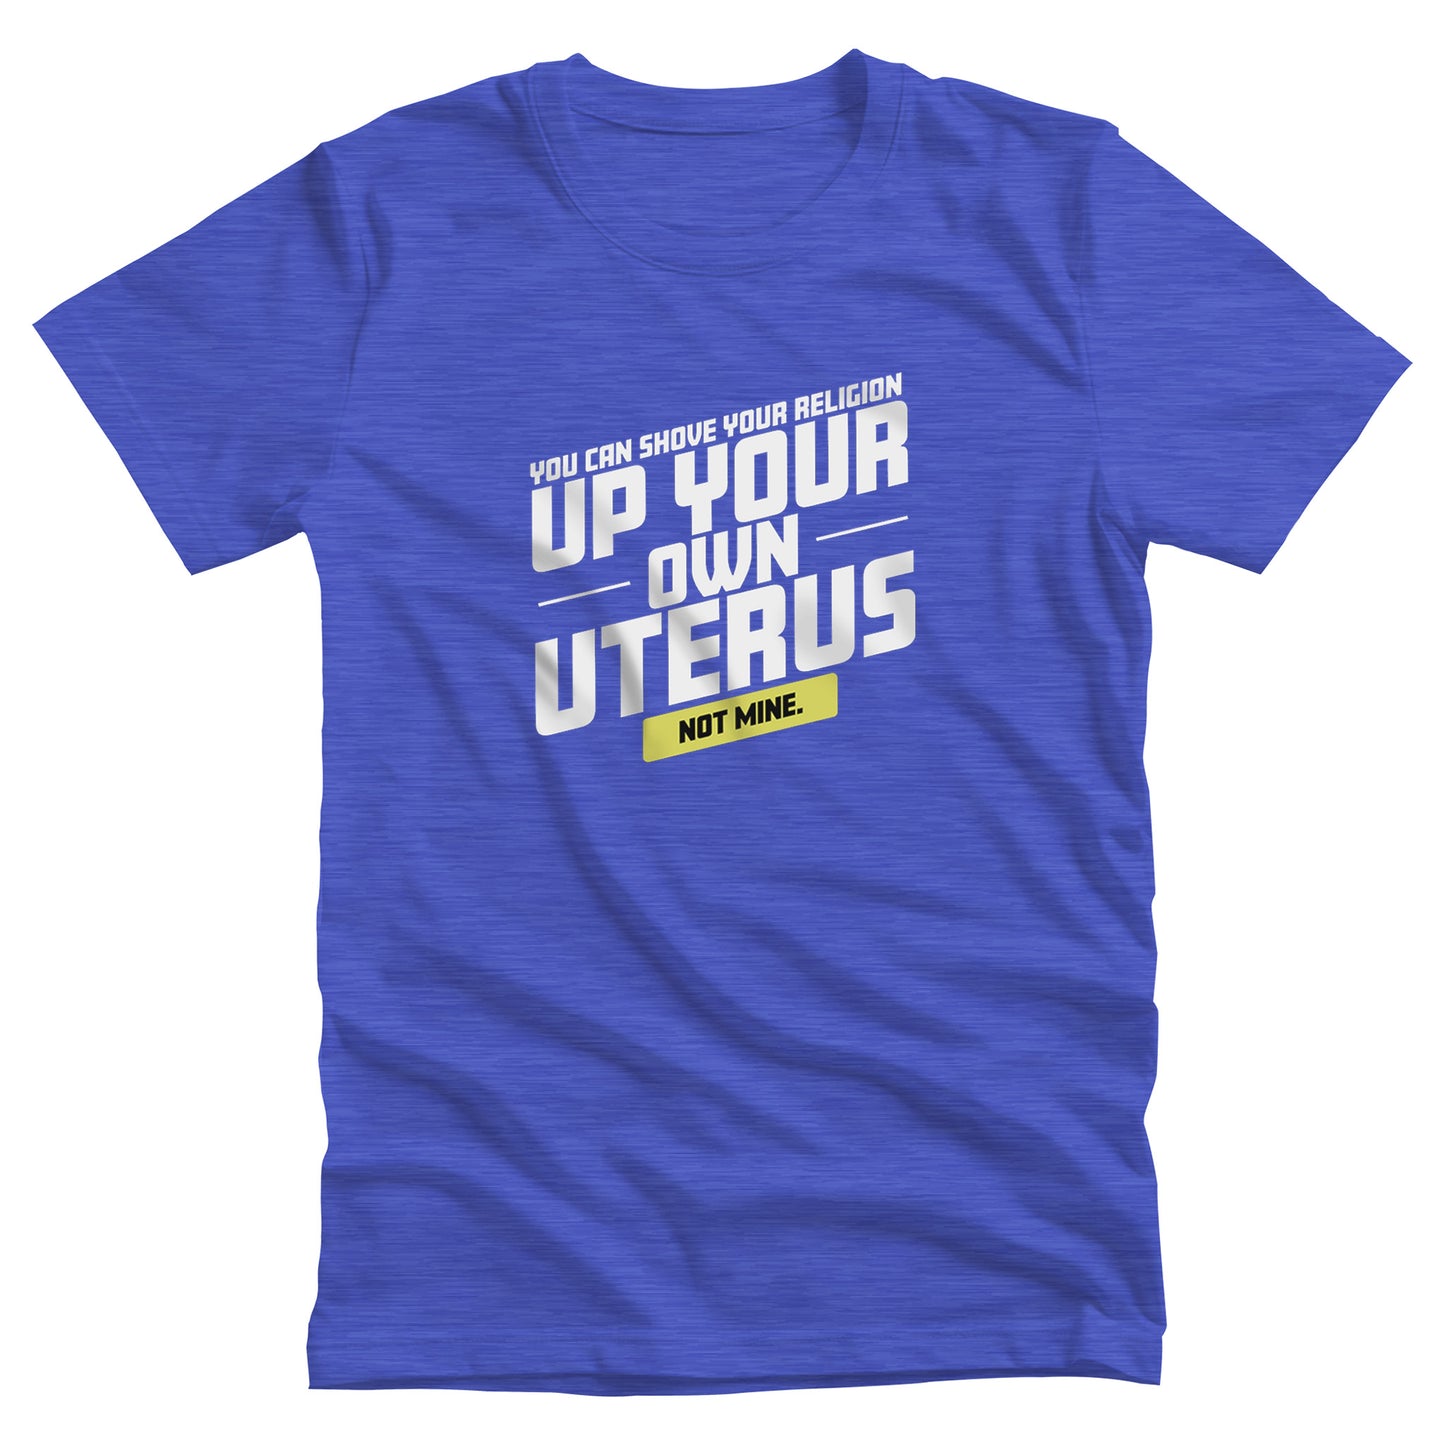 Heather True Royal color unisex t-shirt that says, “You Can Shove Your Religion Up Your Own Uterus, Not Mine.” The text is all slanted upwards, and the words “Not Mine” are in a yellow rectangle.